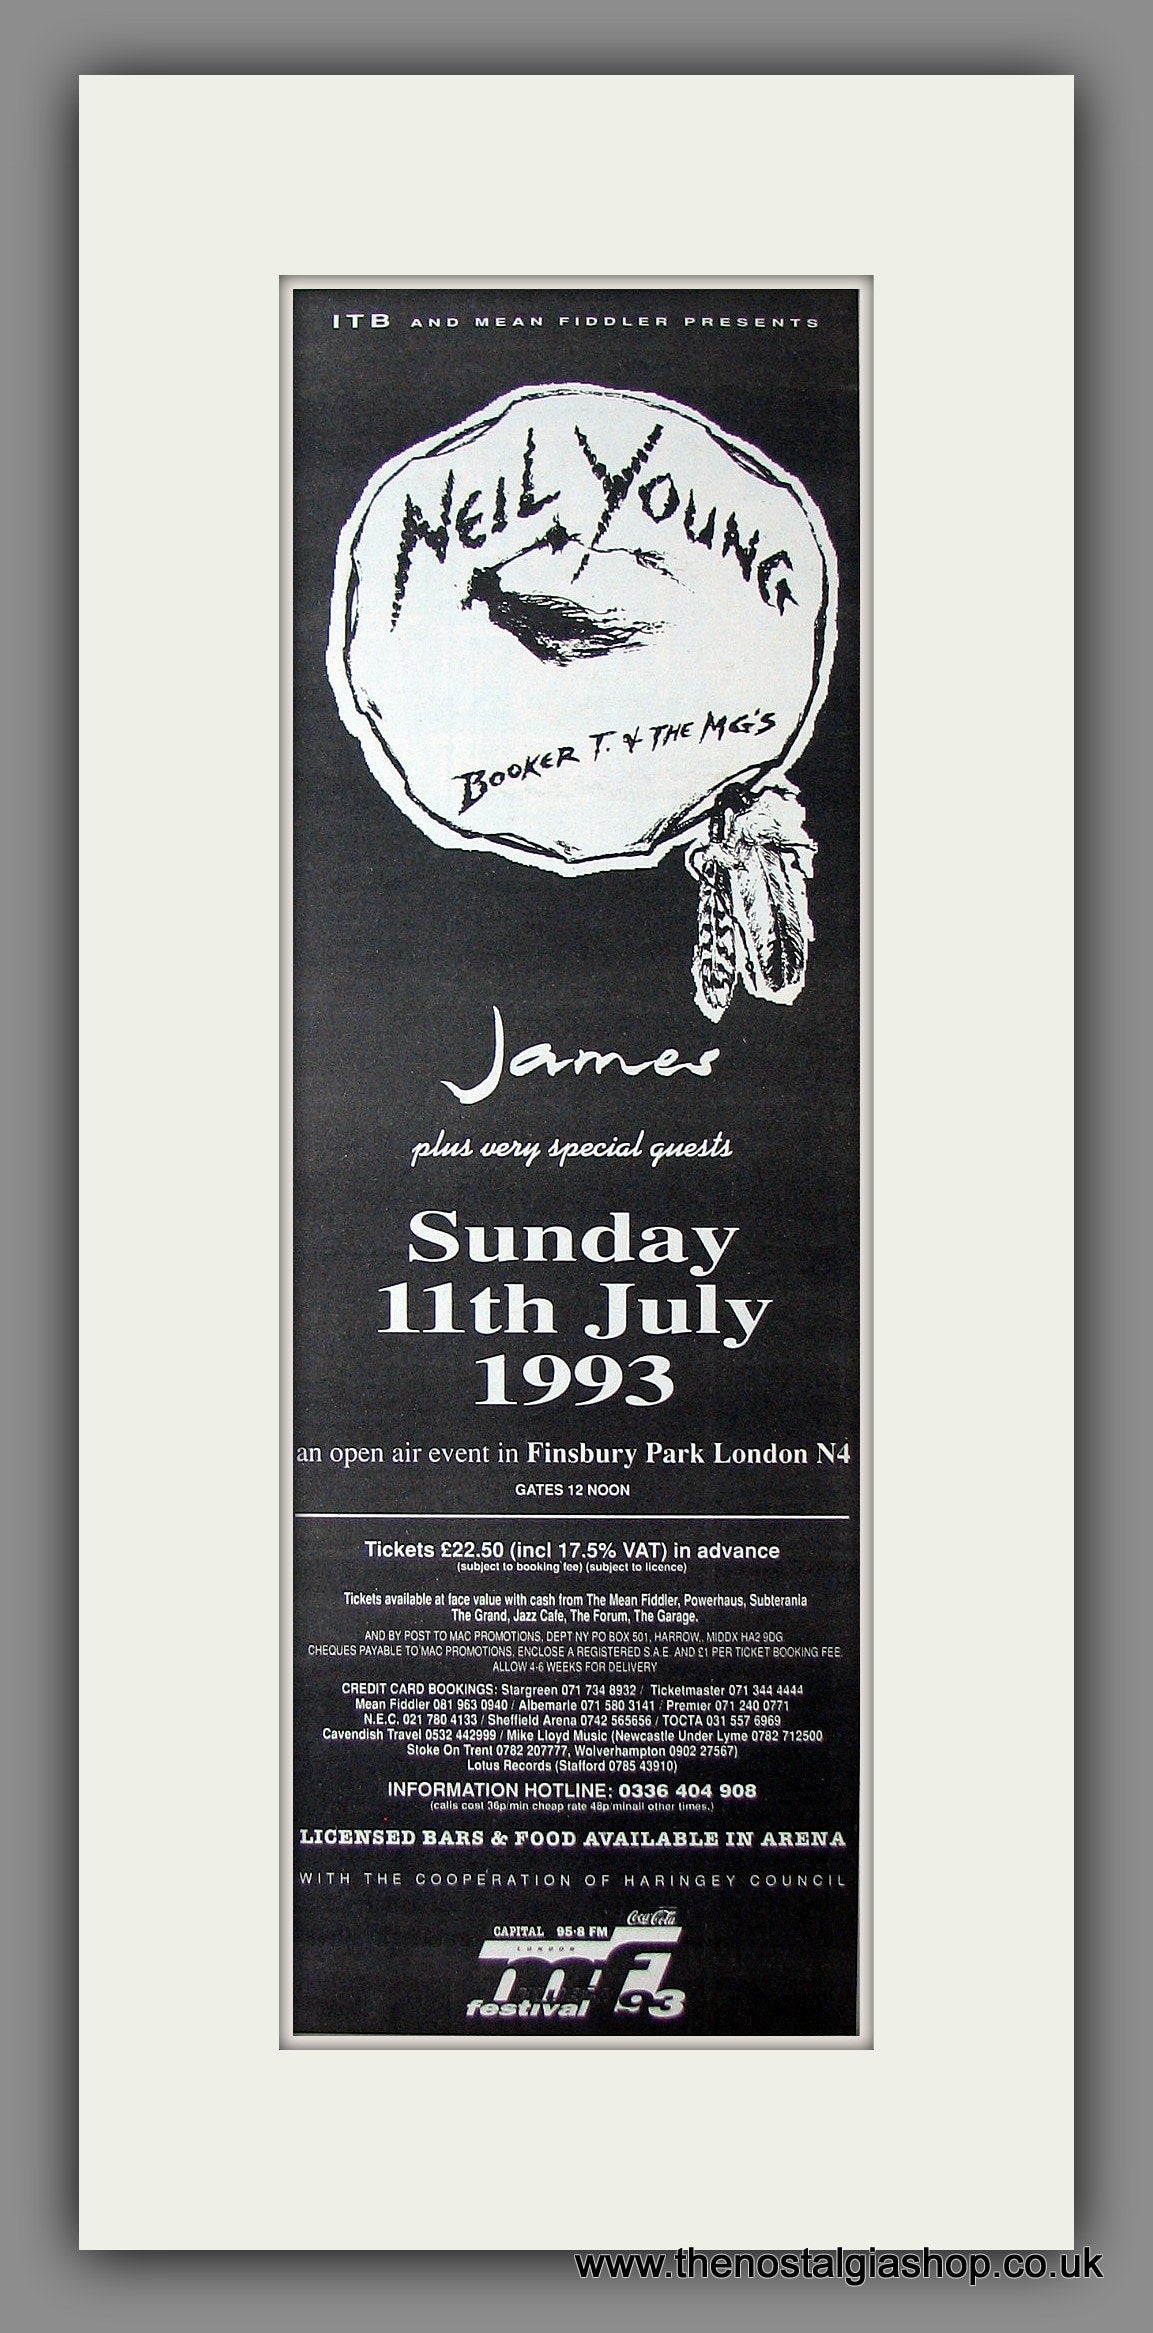 Neil Young with James. Finsbury Park 11th July '93. Original Advert 1993 (ref AD200023)